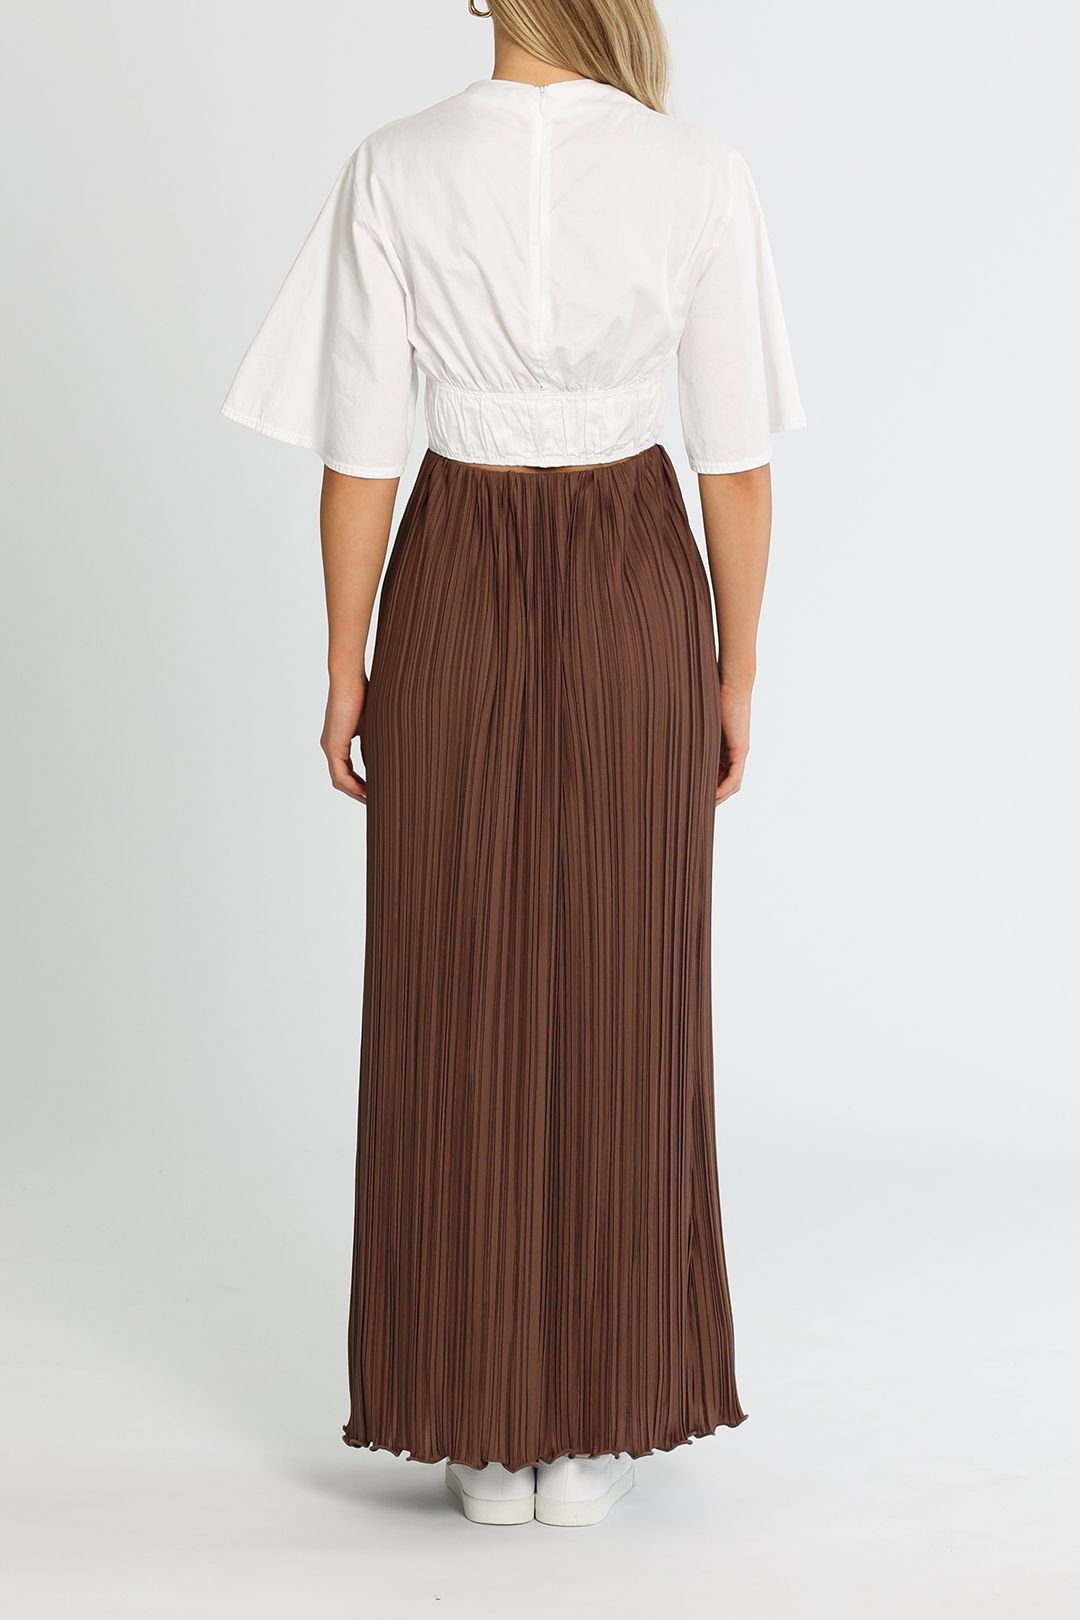 Significant Other Adeline Skirt Chocolate Pleats